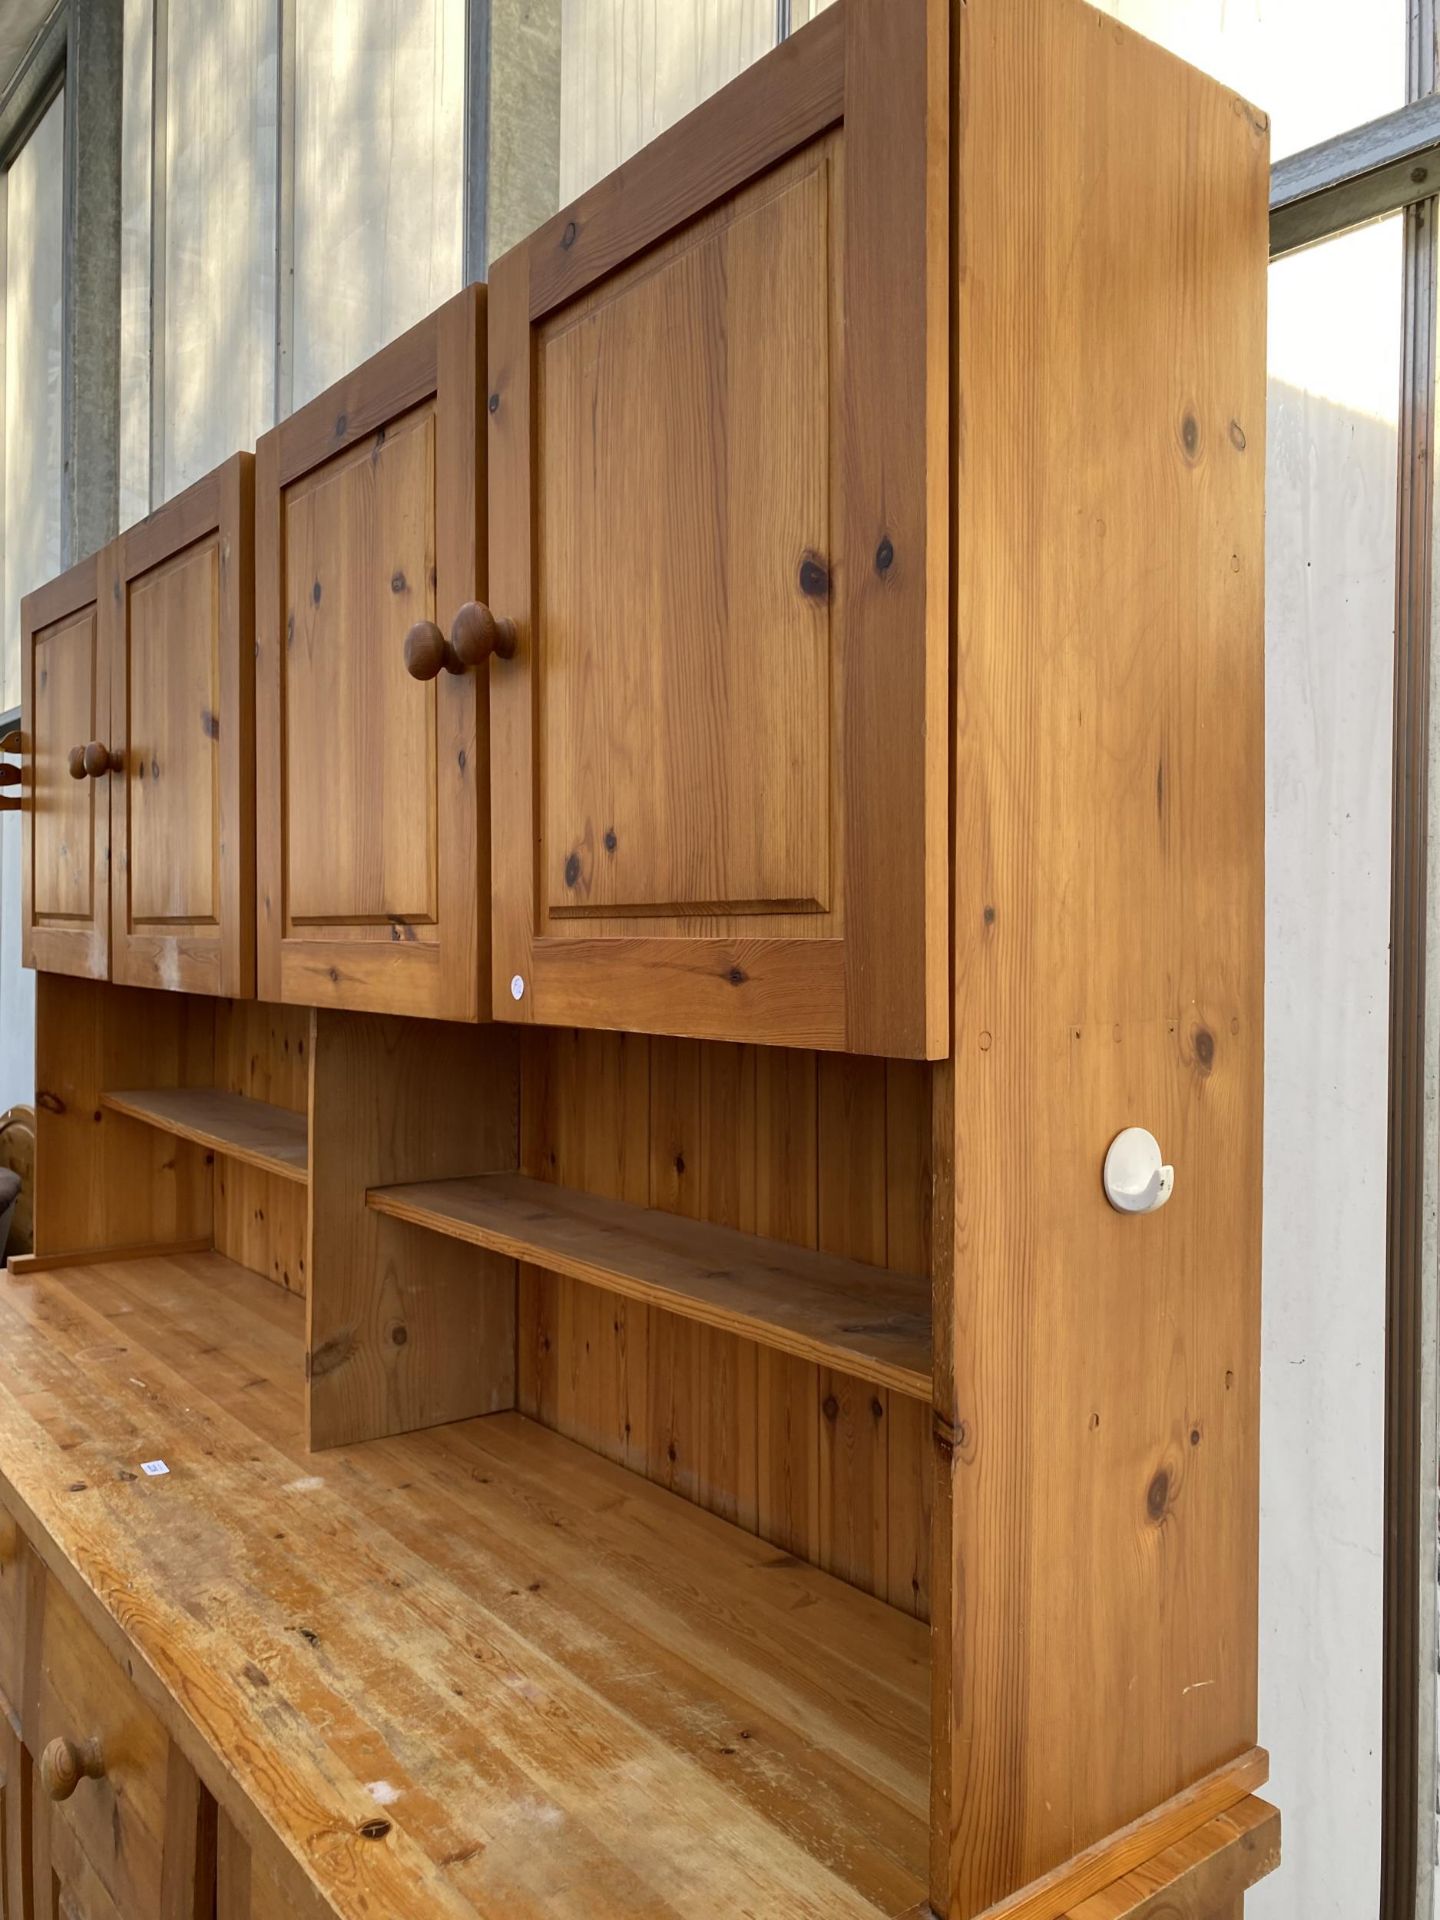 A MODERN PINE KITCHEN DRESSER WITH CUPBOARDS AND DRAWERS TO BASE AND TOP, 84" WIDE - Image 4 of 5